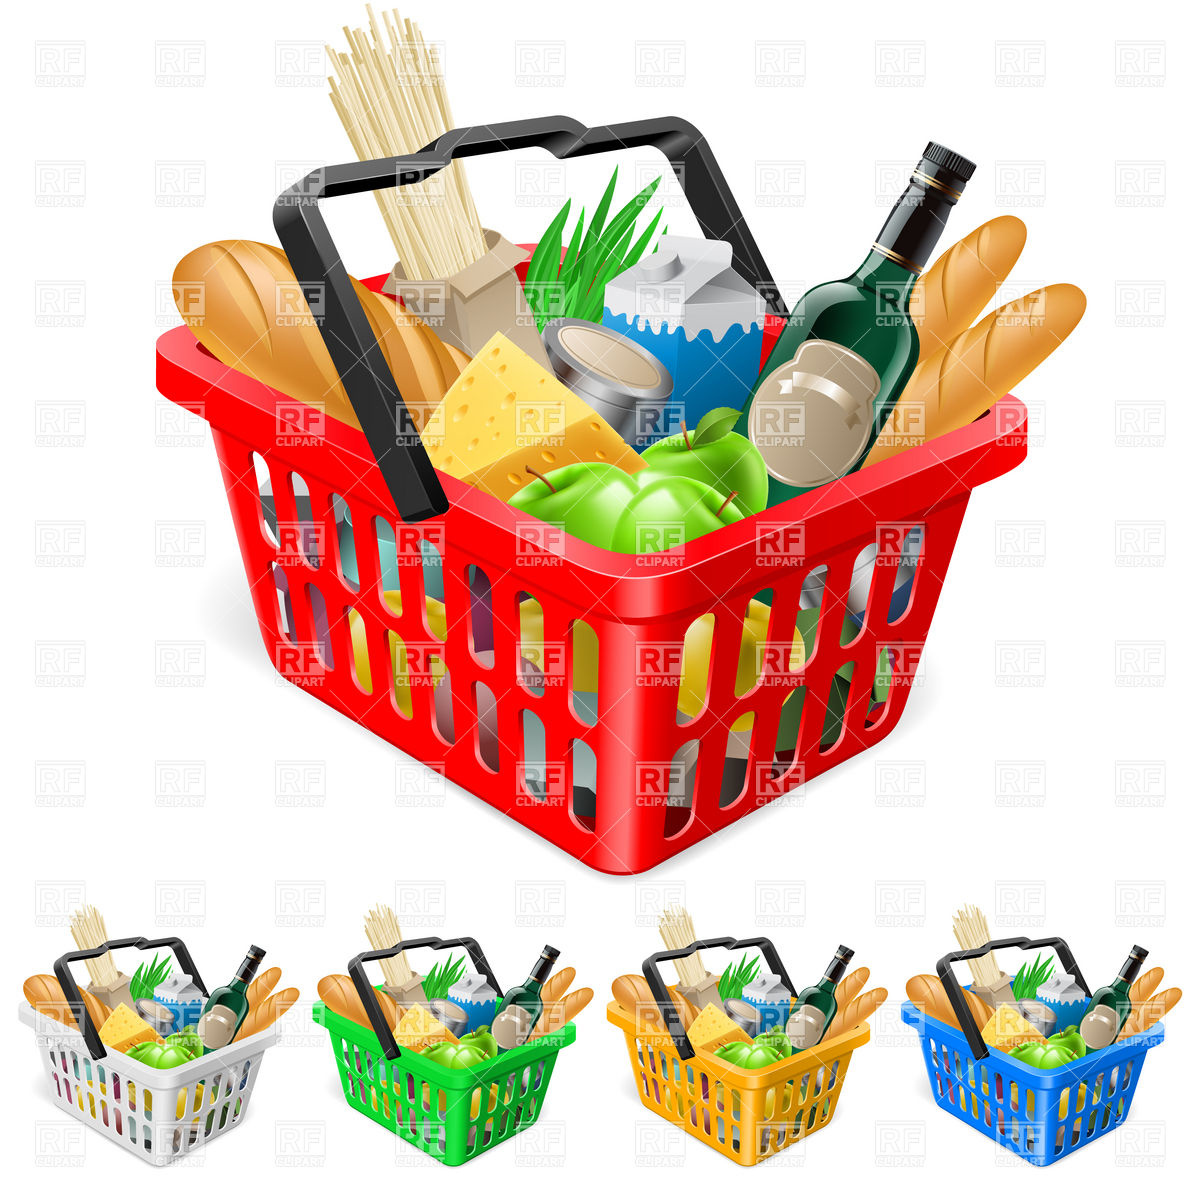 Shopping Basket With Food 8054 Food And Beverages Download Royalty